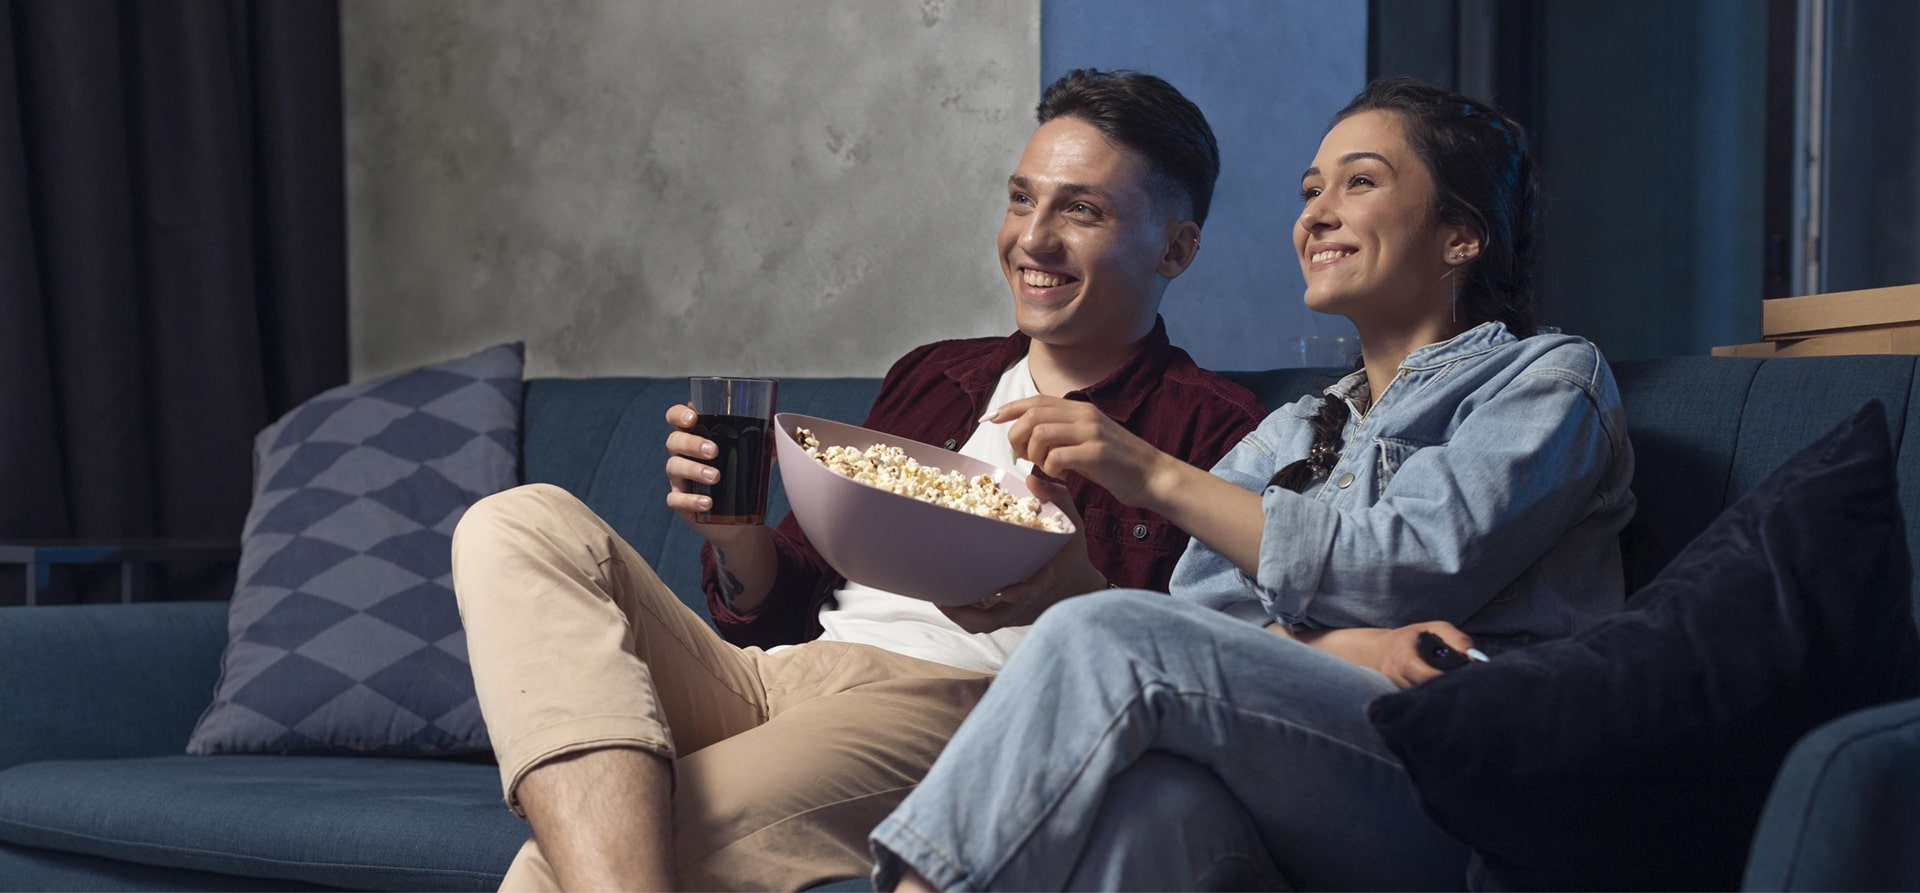 A young couple eating popcorn and watching a movie on their couch